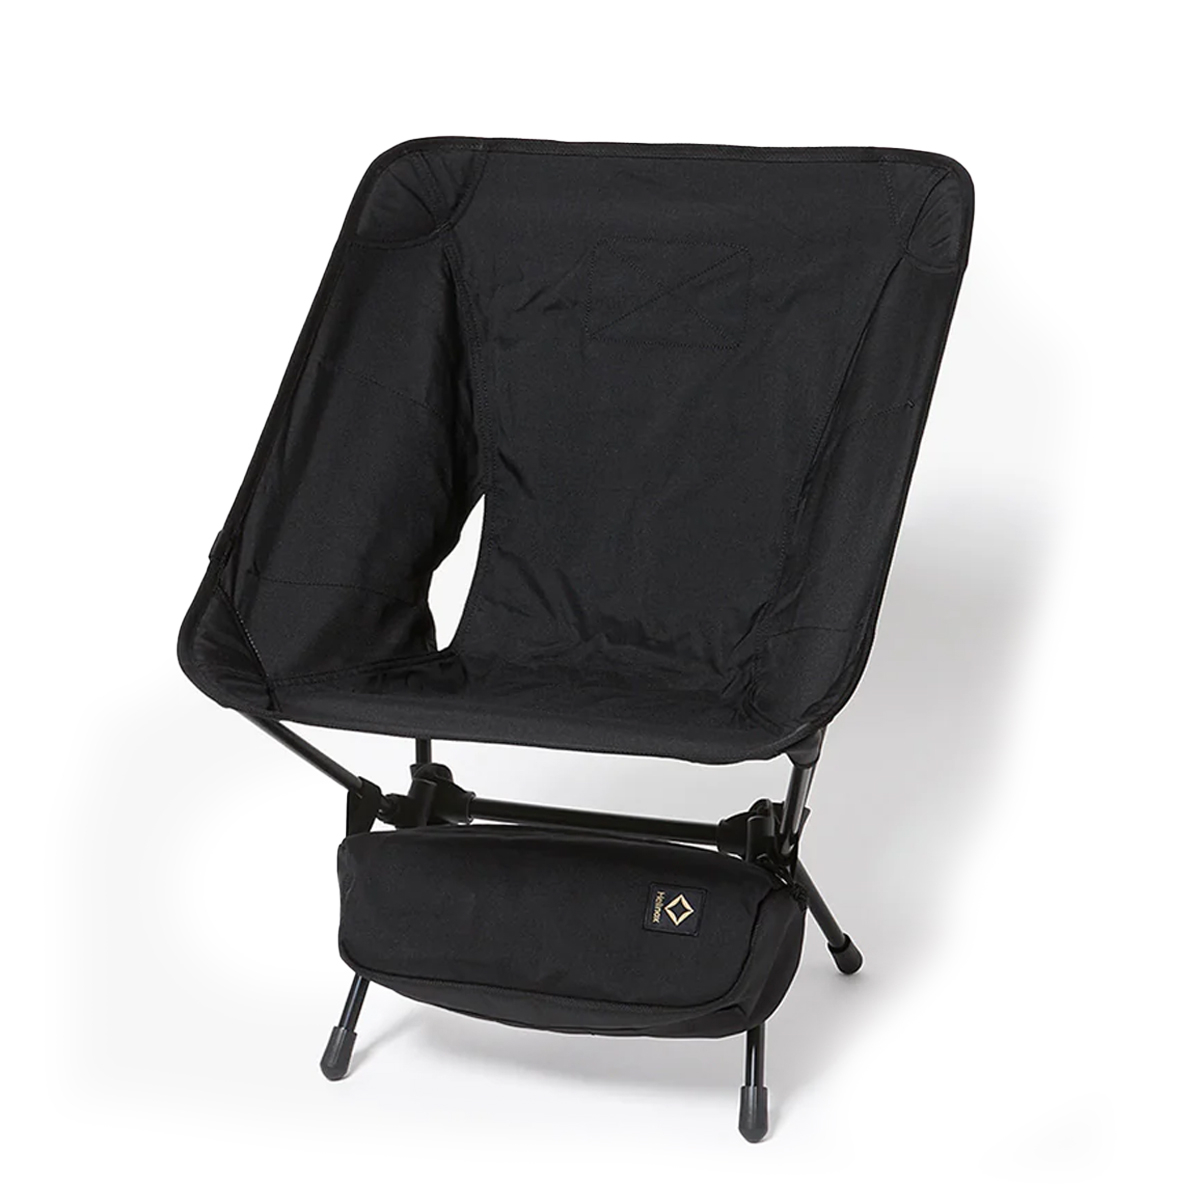 Helinox Tactical Chair One Black, portable, lightweight chair